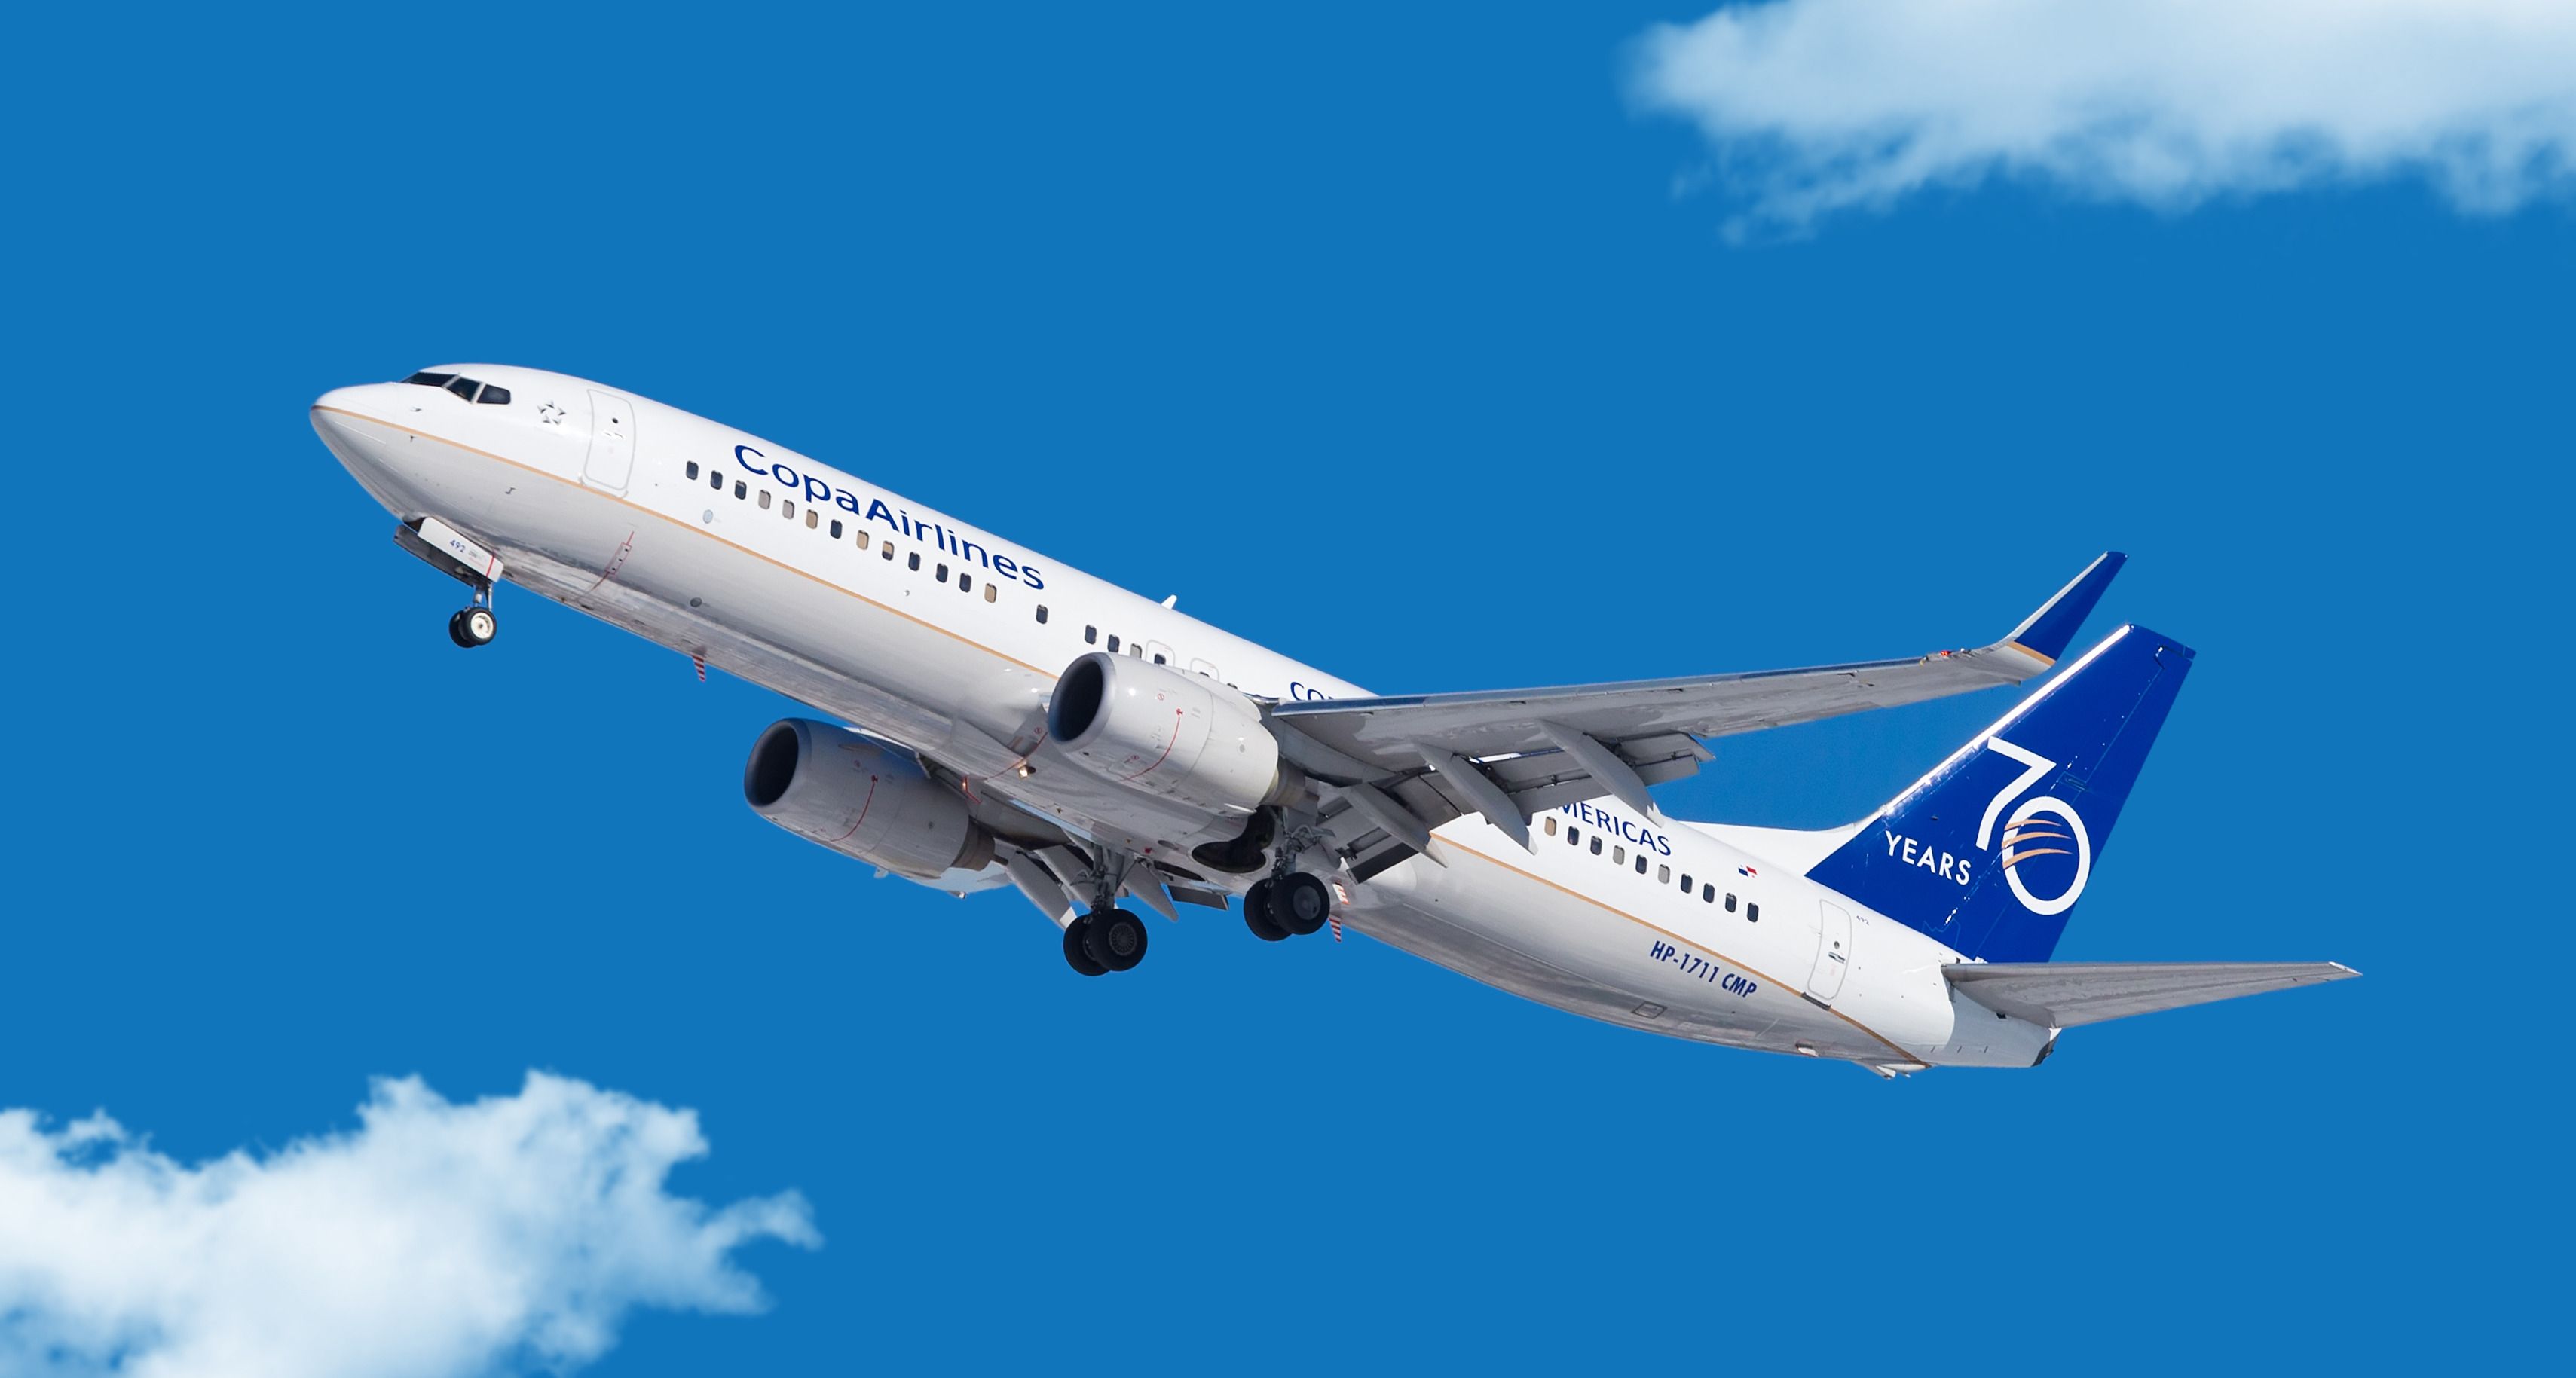 A Copa Airlines aircraft flying in the sky.